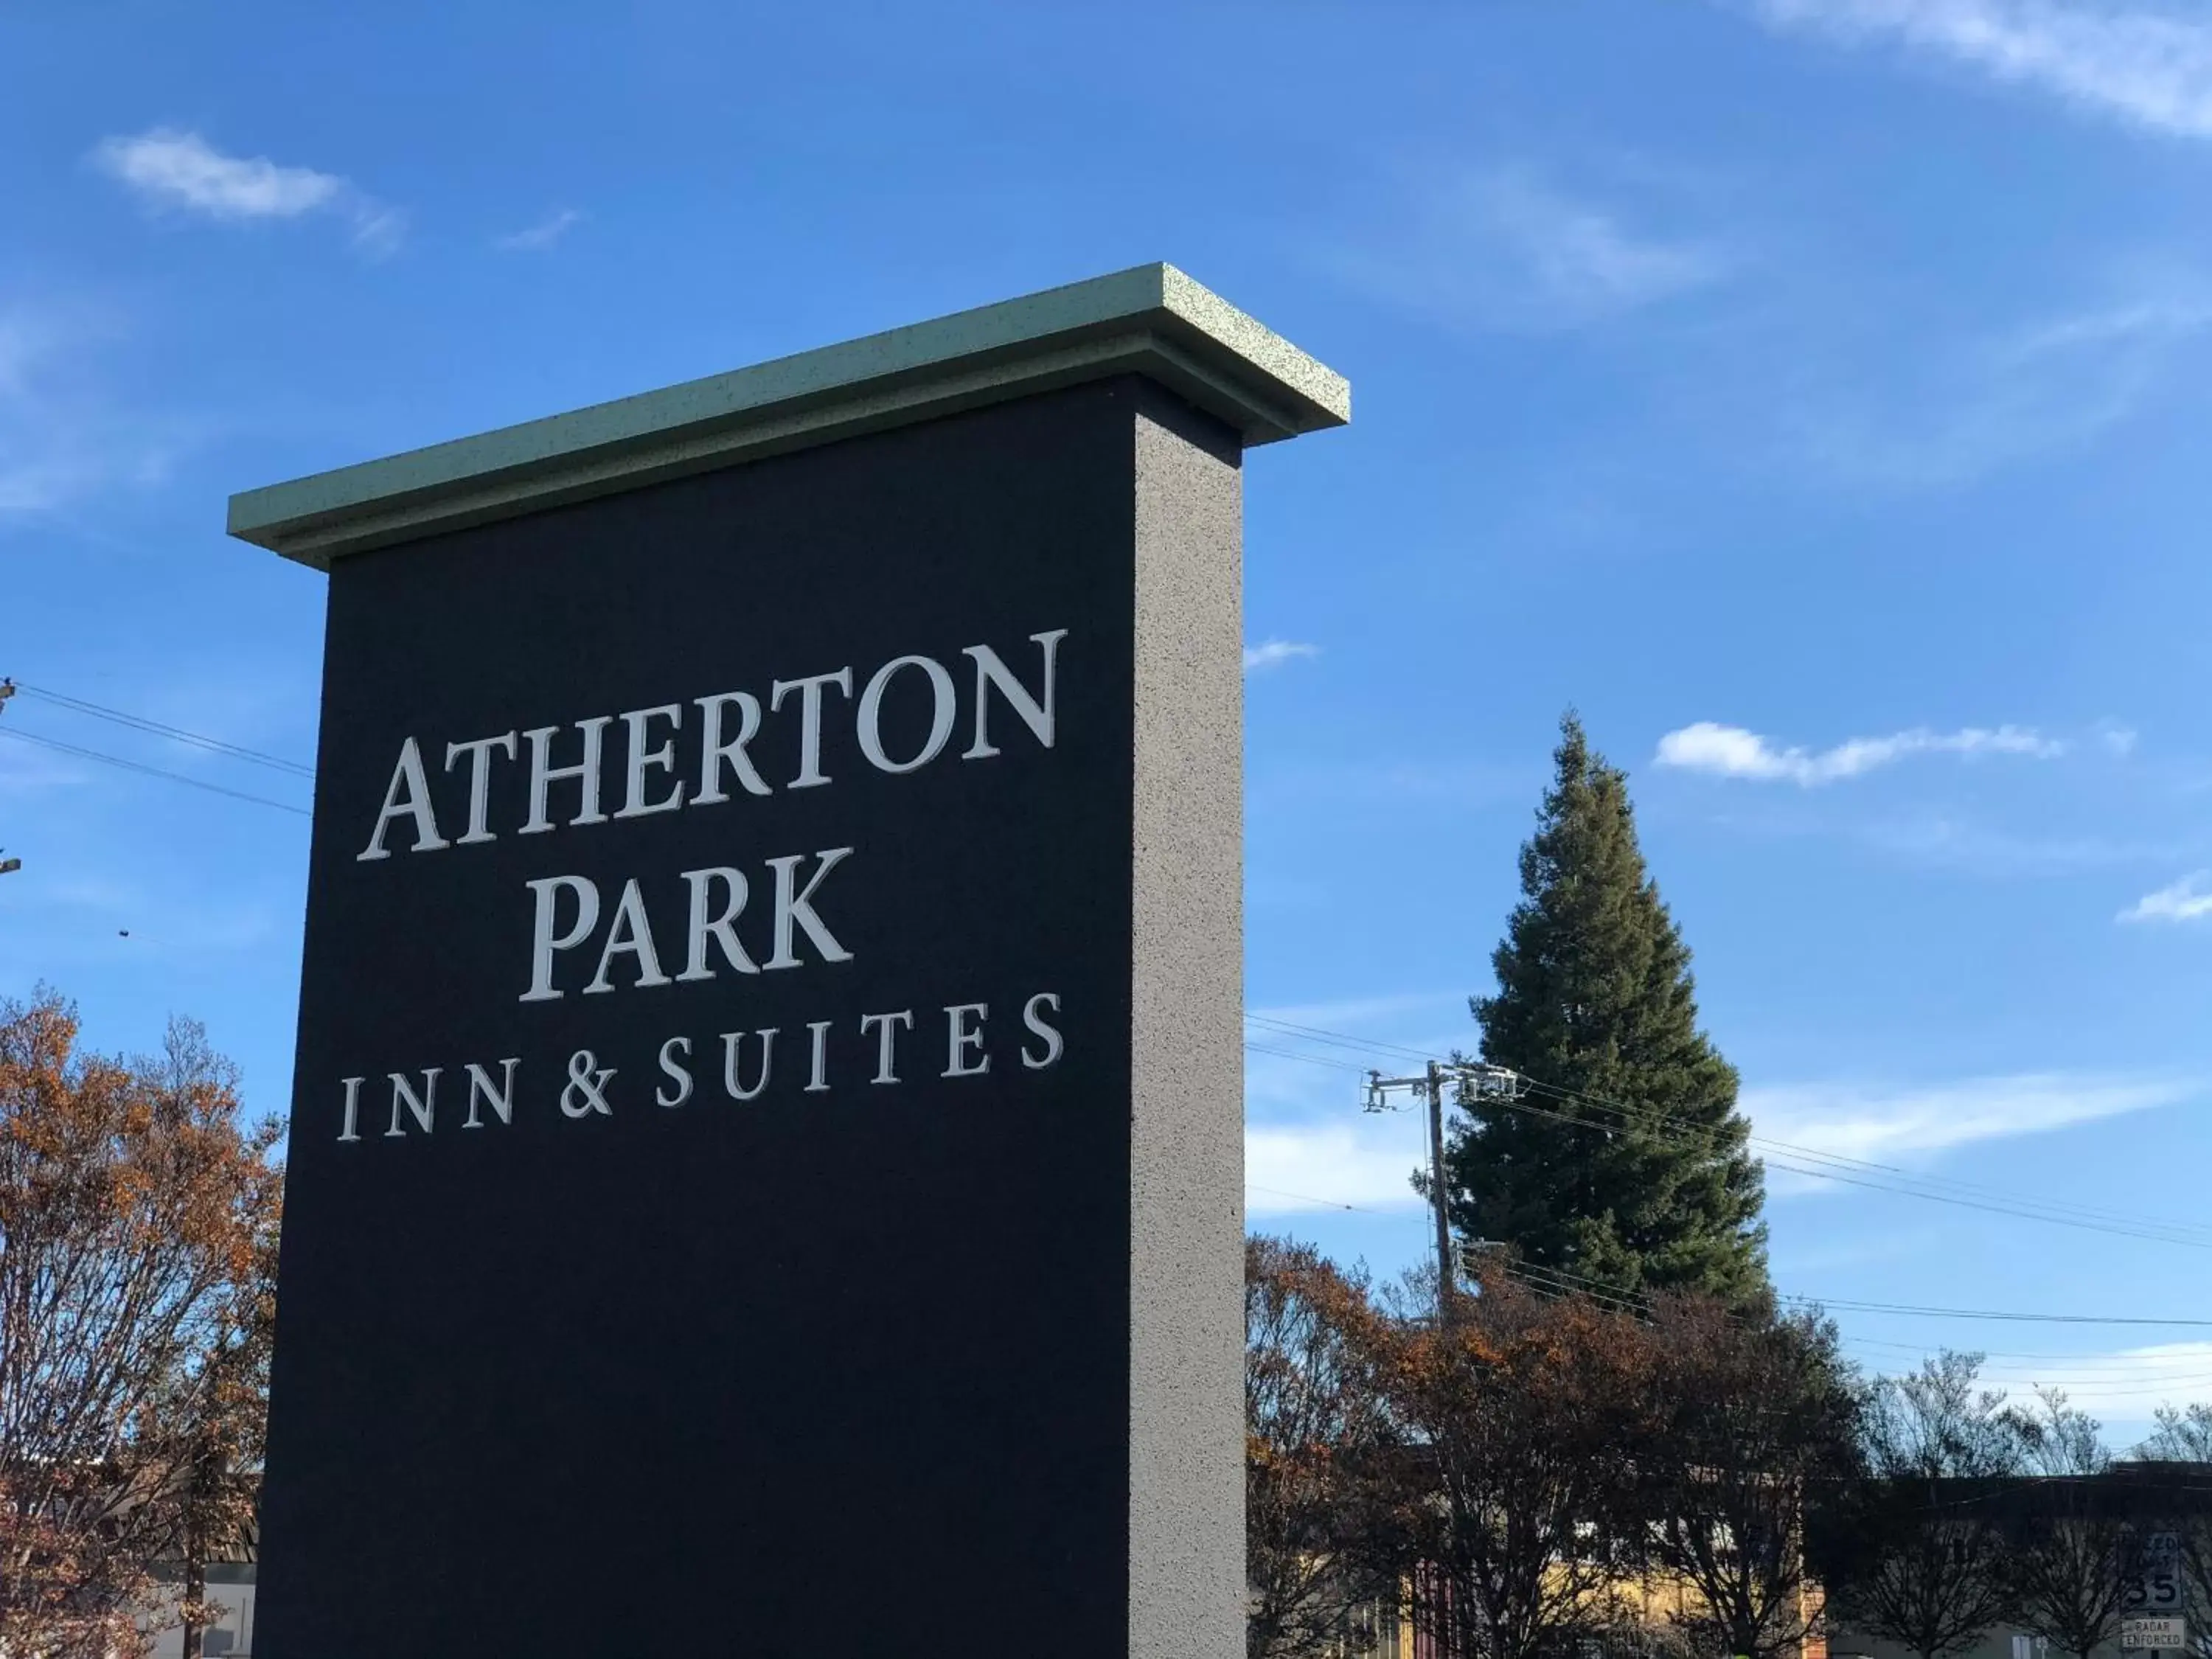 Property logo or sign, Property Logo/Sign in Atherton Park Inn and Suites